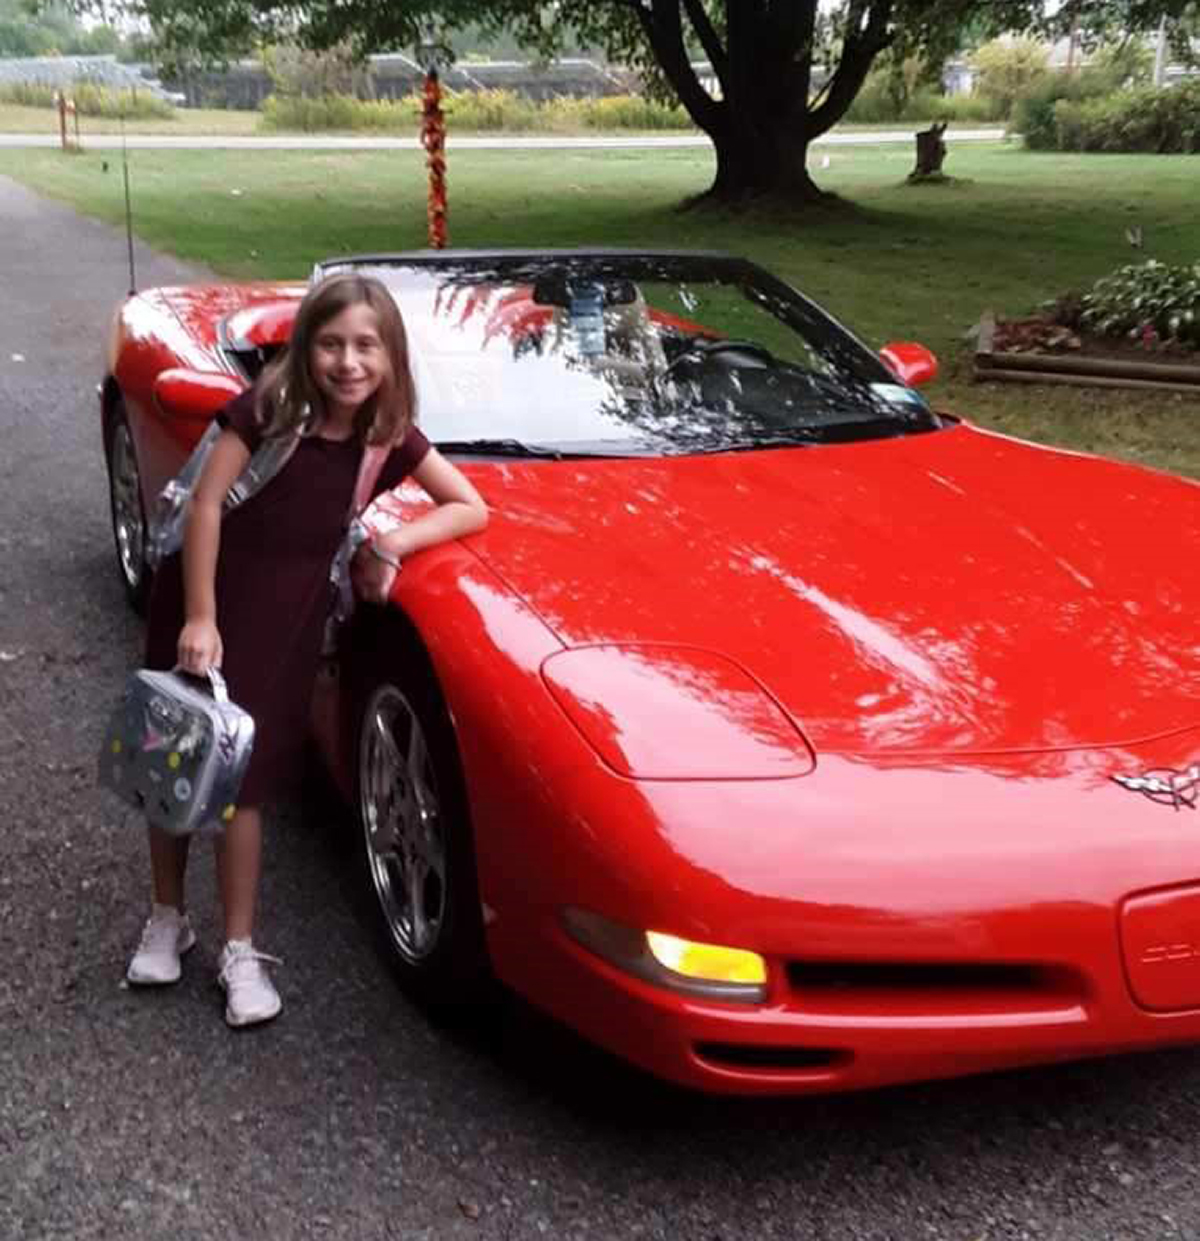 PHOTO: Sophie Enderton seen here with a red Corvette in this undated file photo.